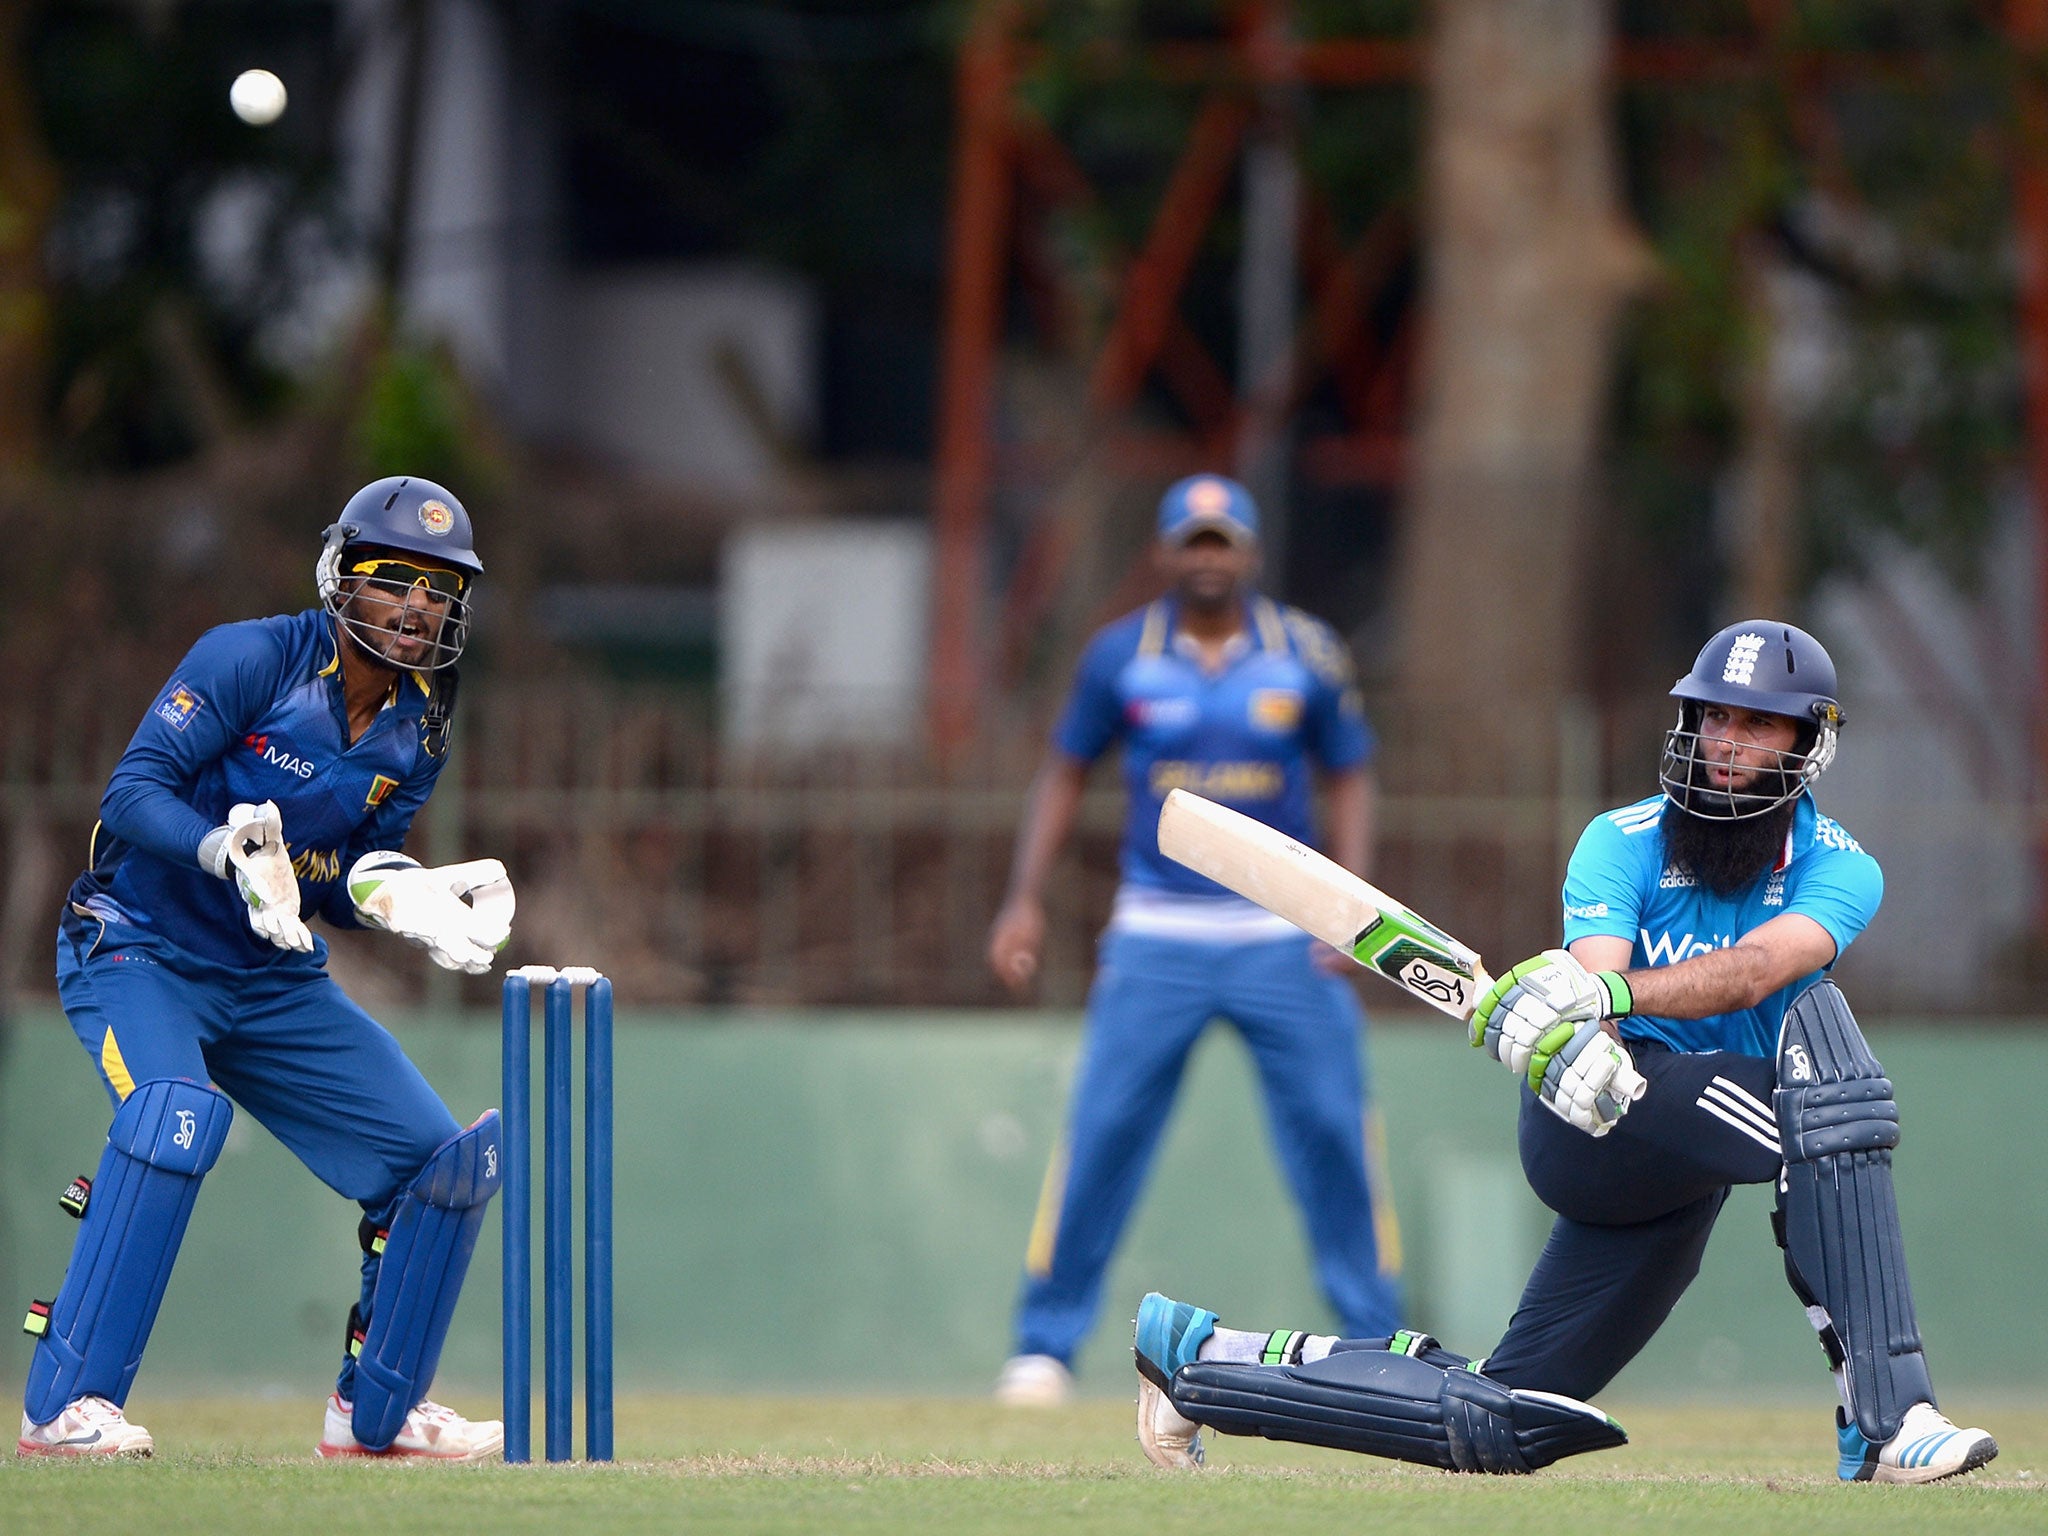 Moeen Ali hit a 21-ball half-century on his way to 56